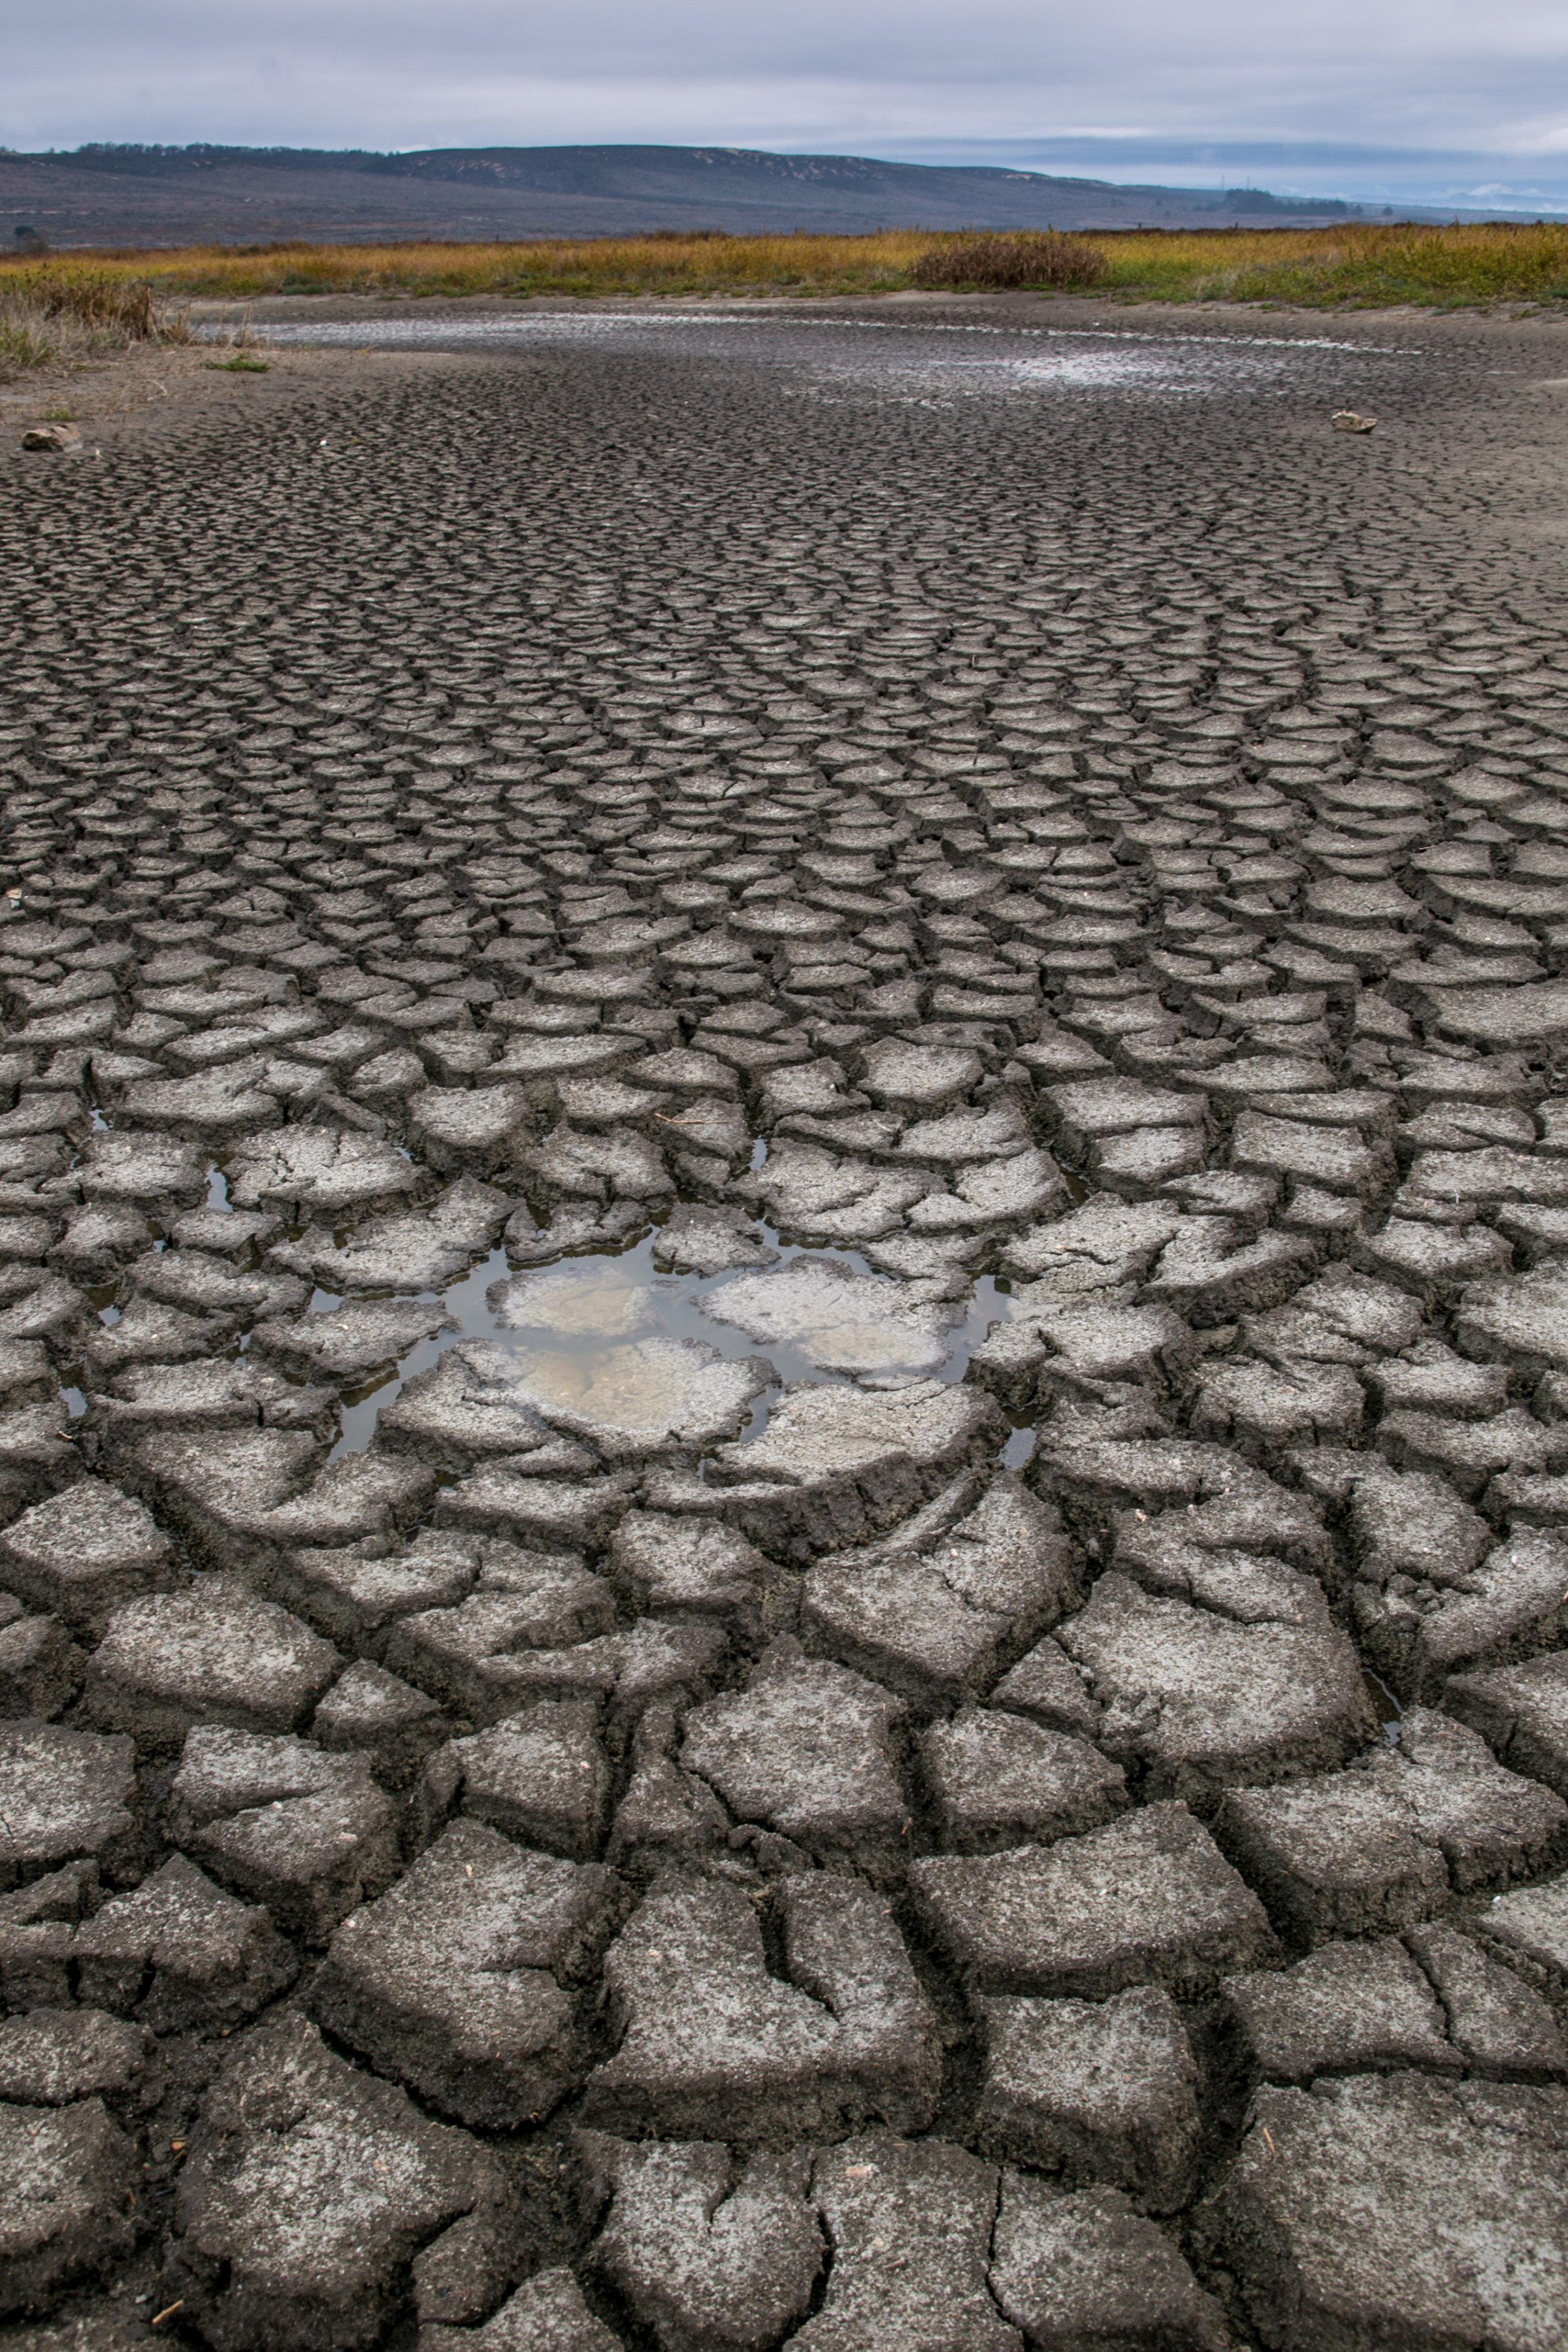 A dried mud flat along a stretch of the now dry Santa Ynez River is viewed on Nov. 15, 2015, near Lompoc, Calif.